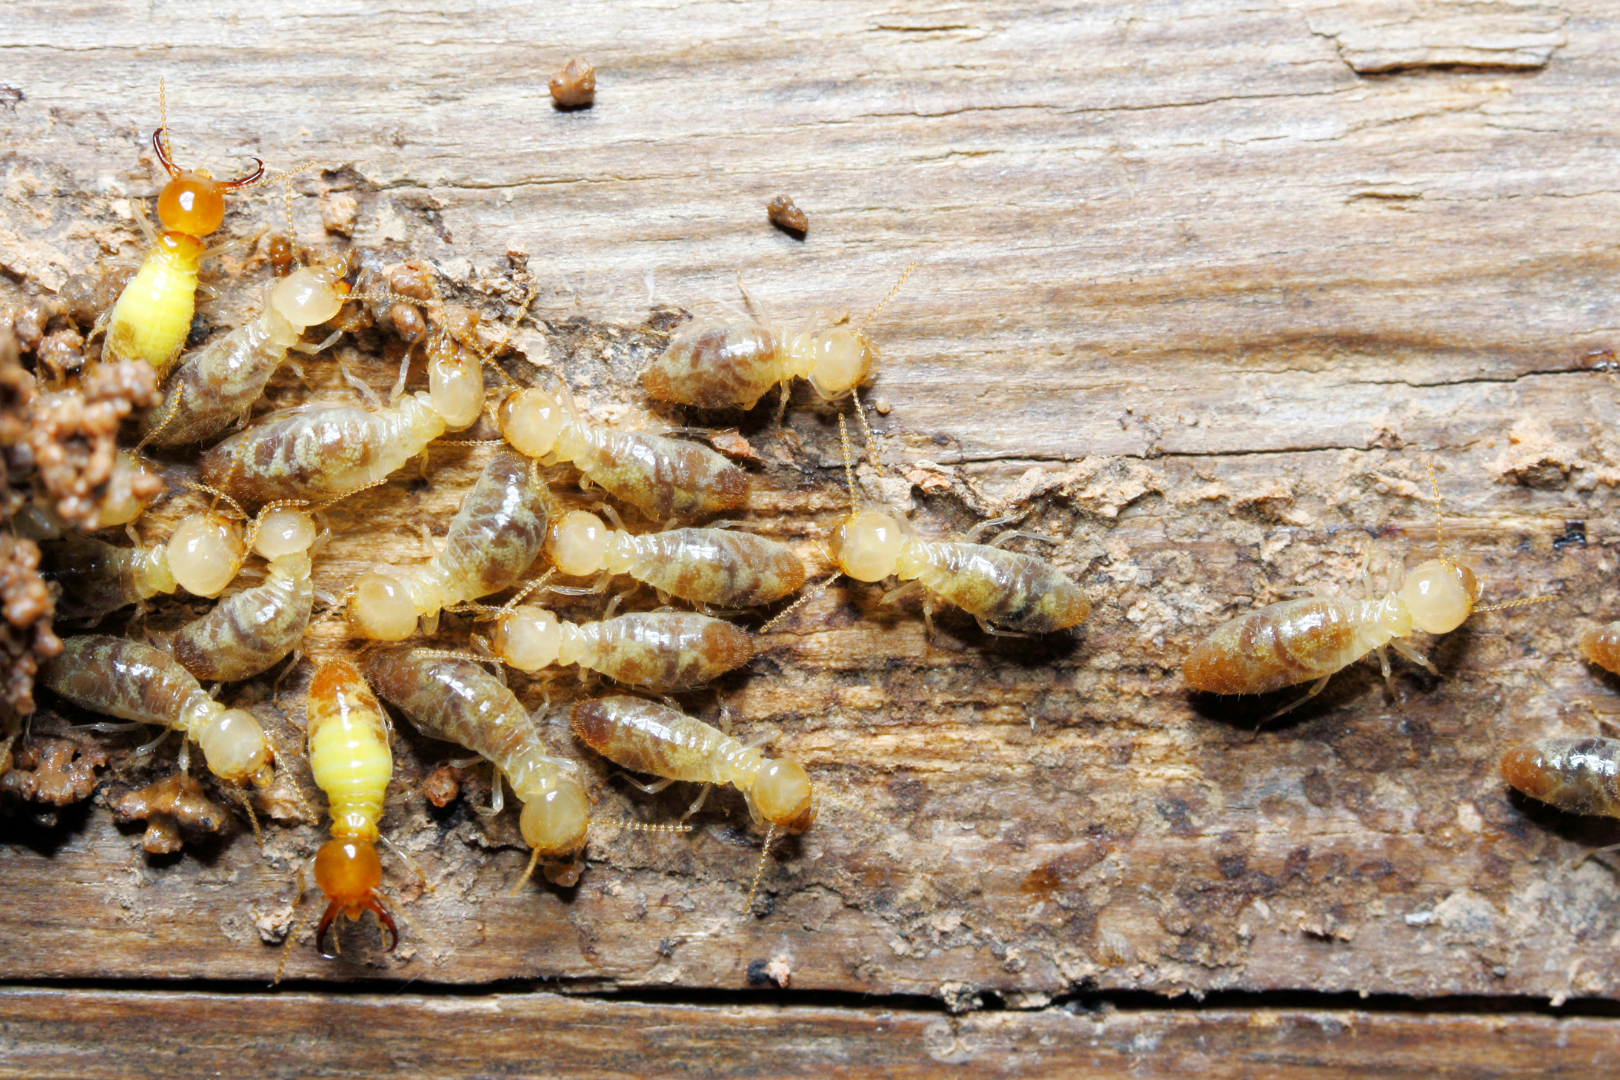 termites can cause significant damage to your home for years